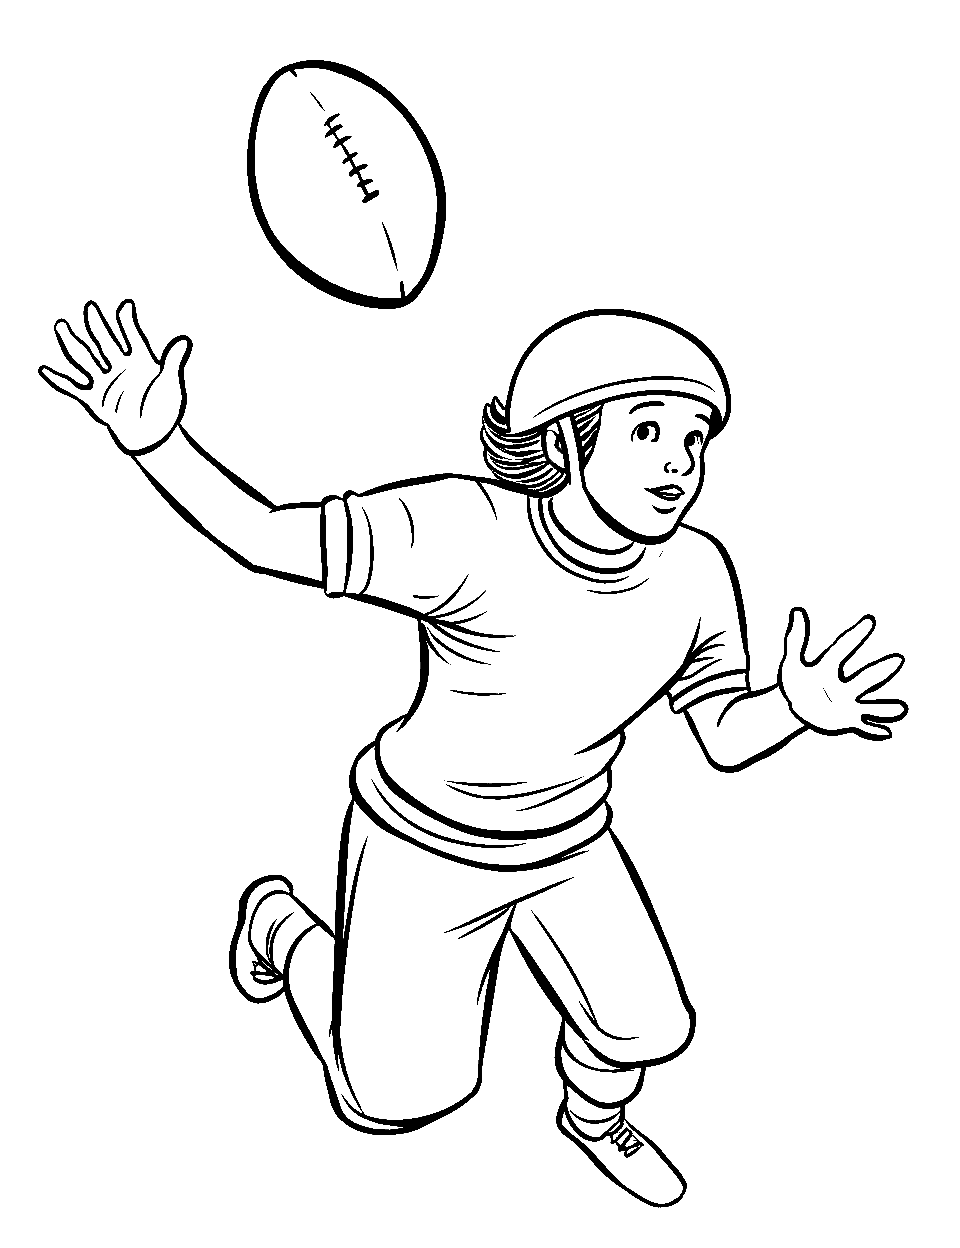 Quick Receiver Catch Coloring Page - A receiver in the act of catching a flying football.